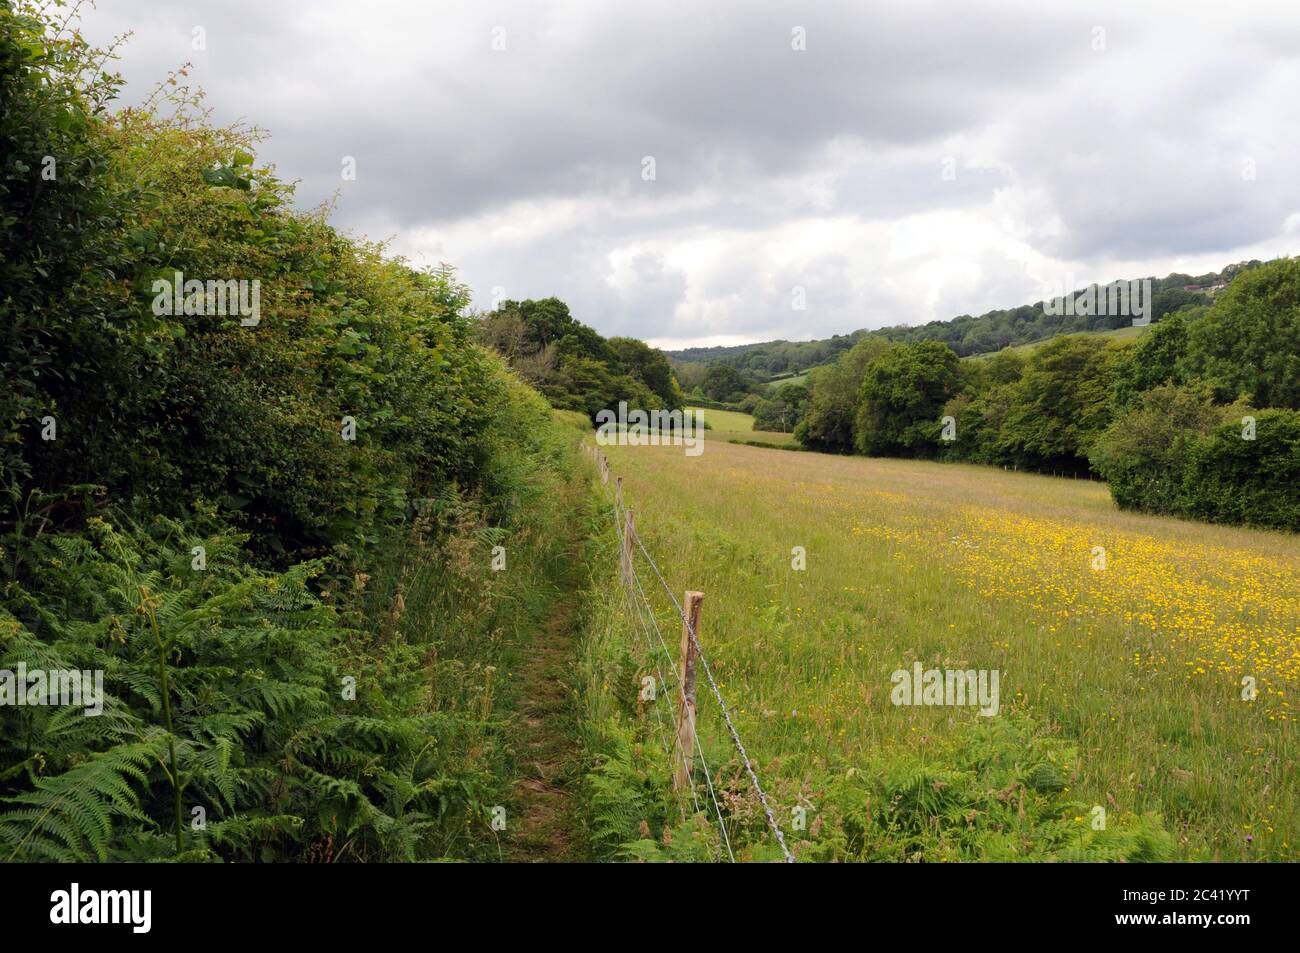 Typical scenery near Burwash in the High Weald of East Sussex. The area has many public footpaths making it excellent walking and hiking country. Stock Photo